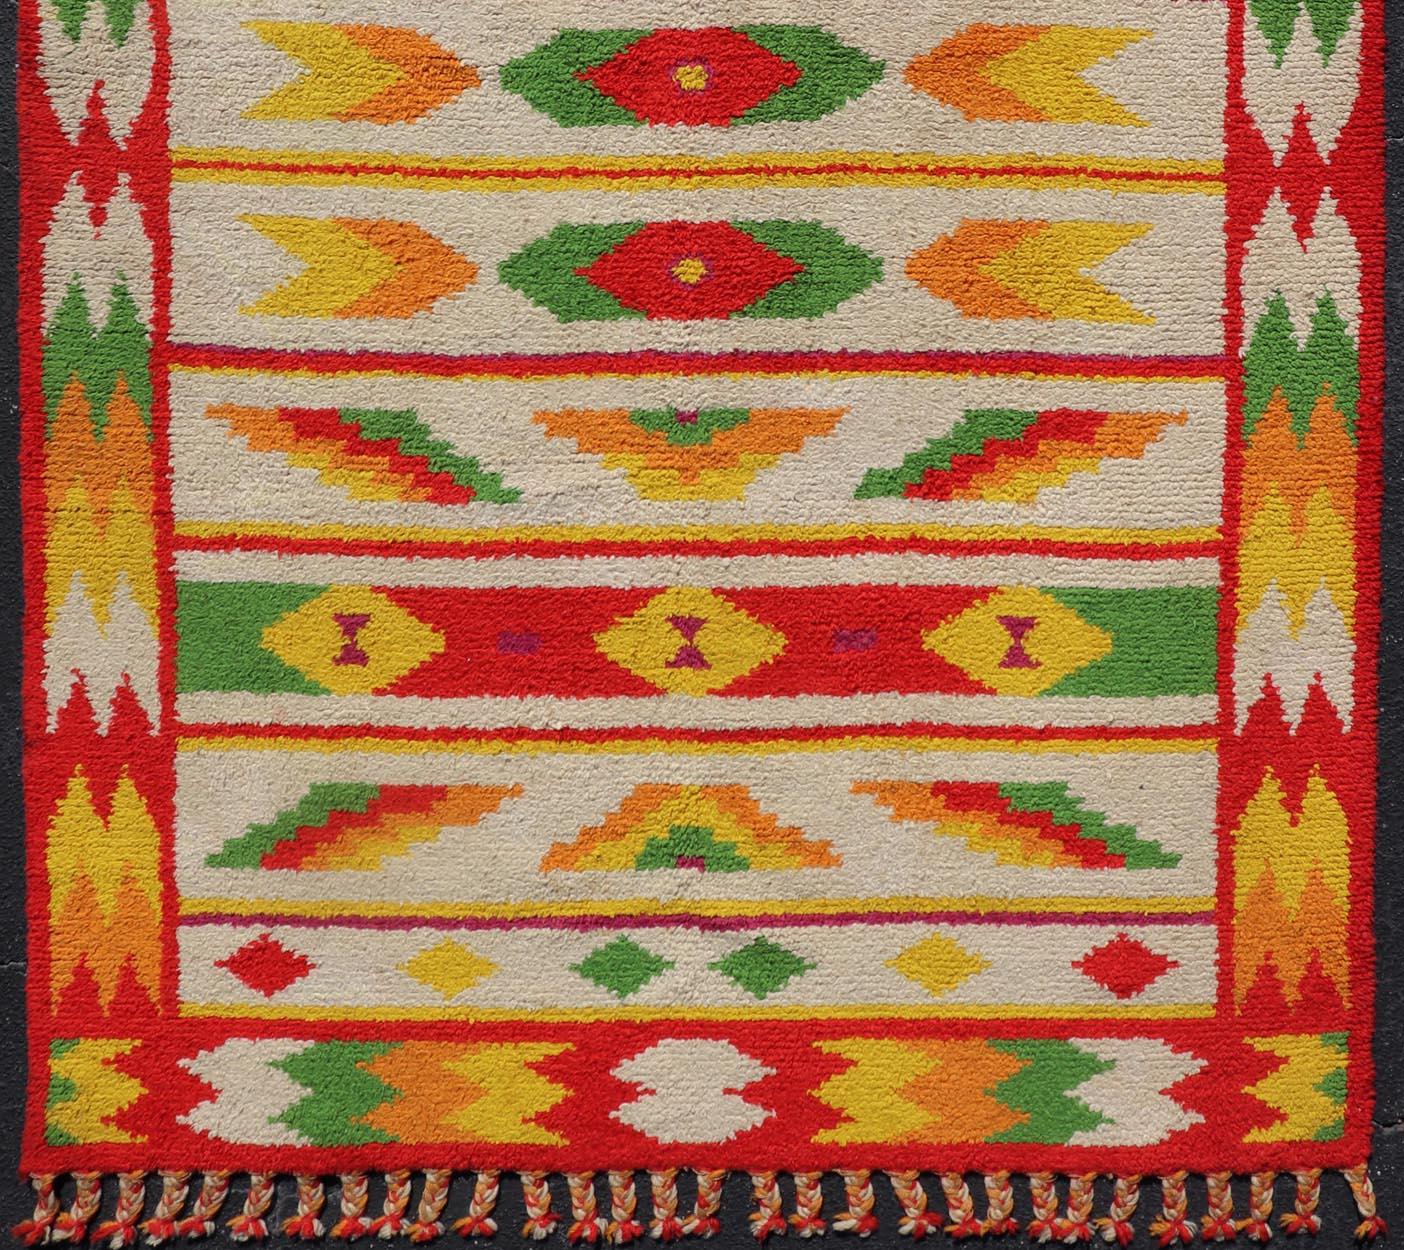 Vintage Moroccan Rug with All-Over Tribal Motif Design In Red, Green & Yellow For Sale 3